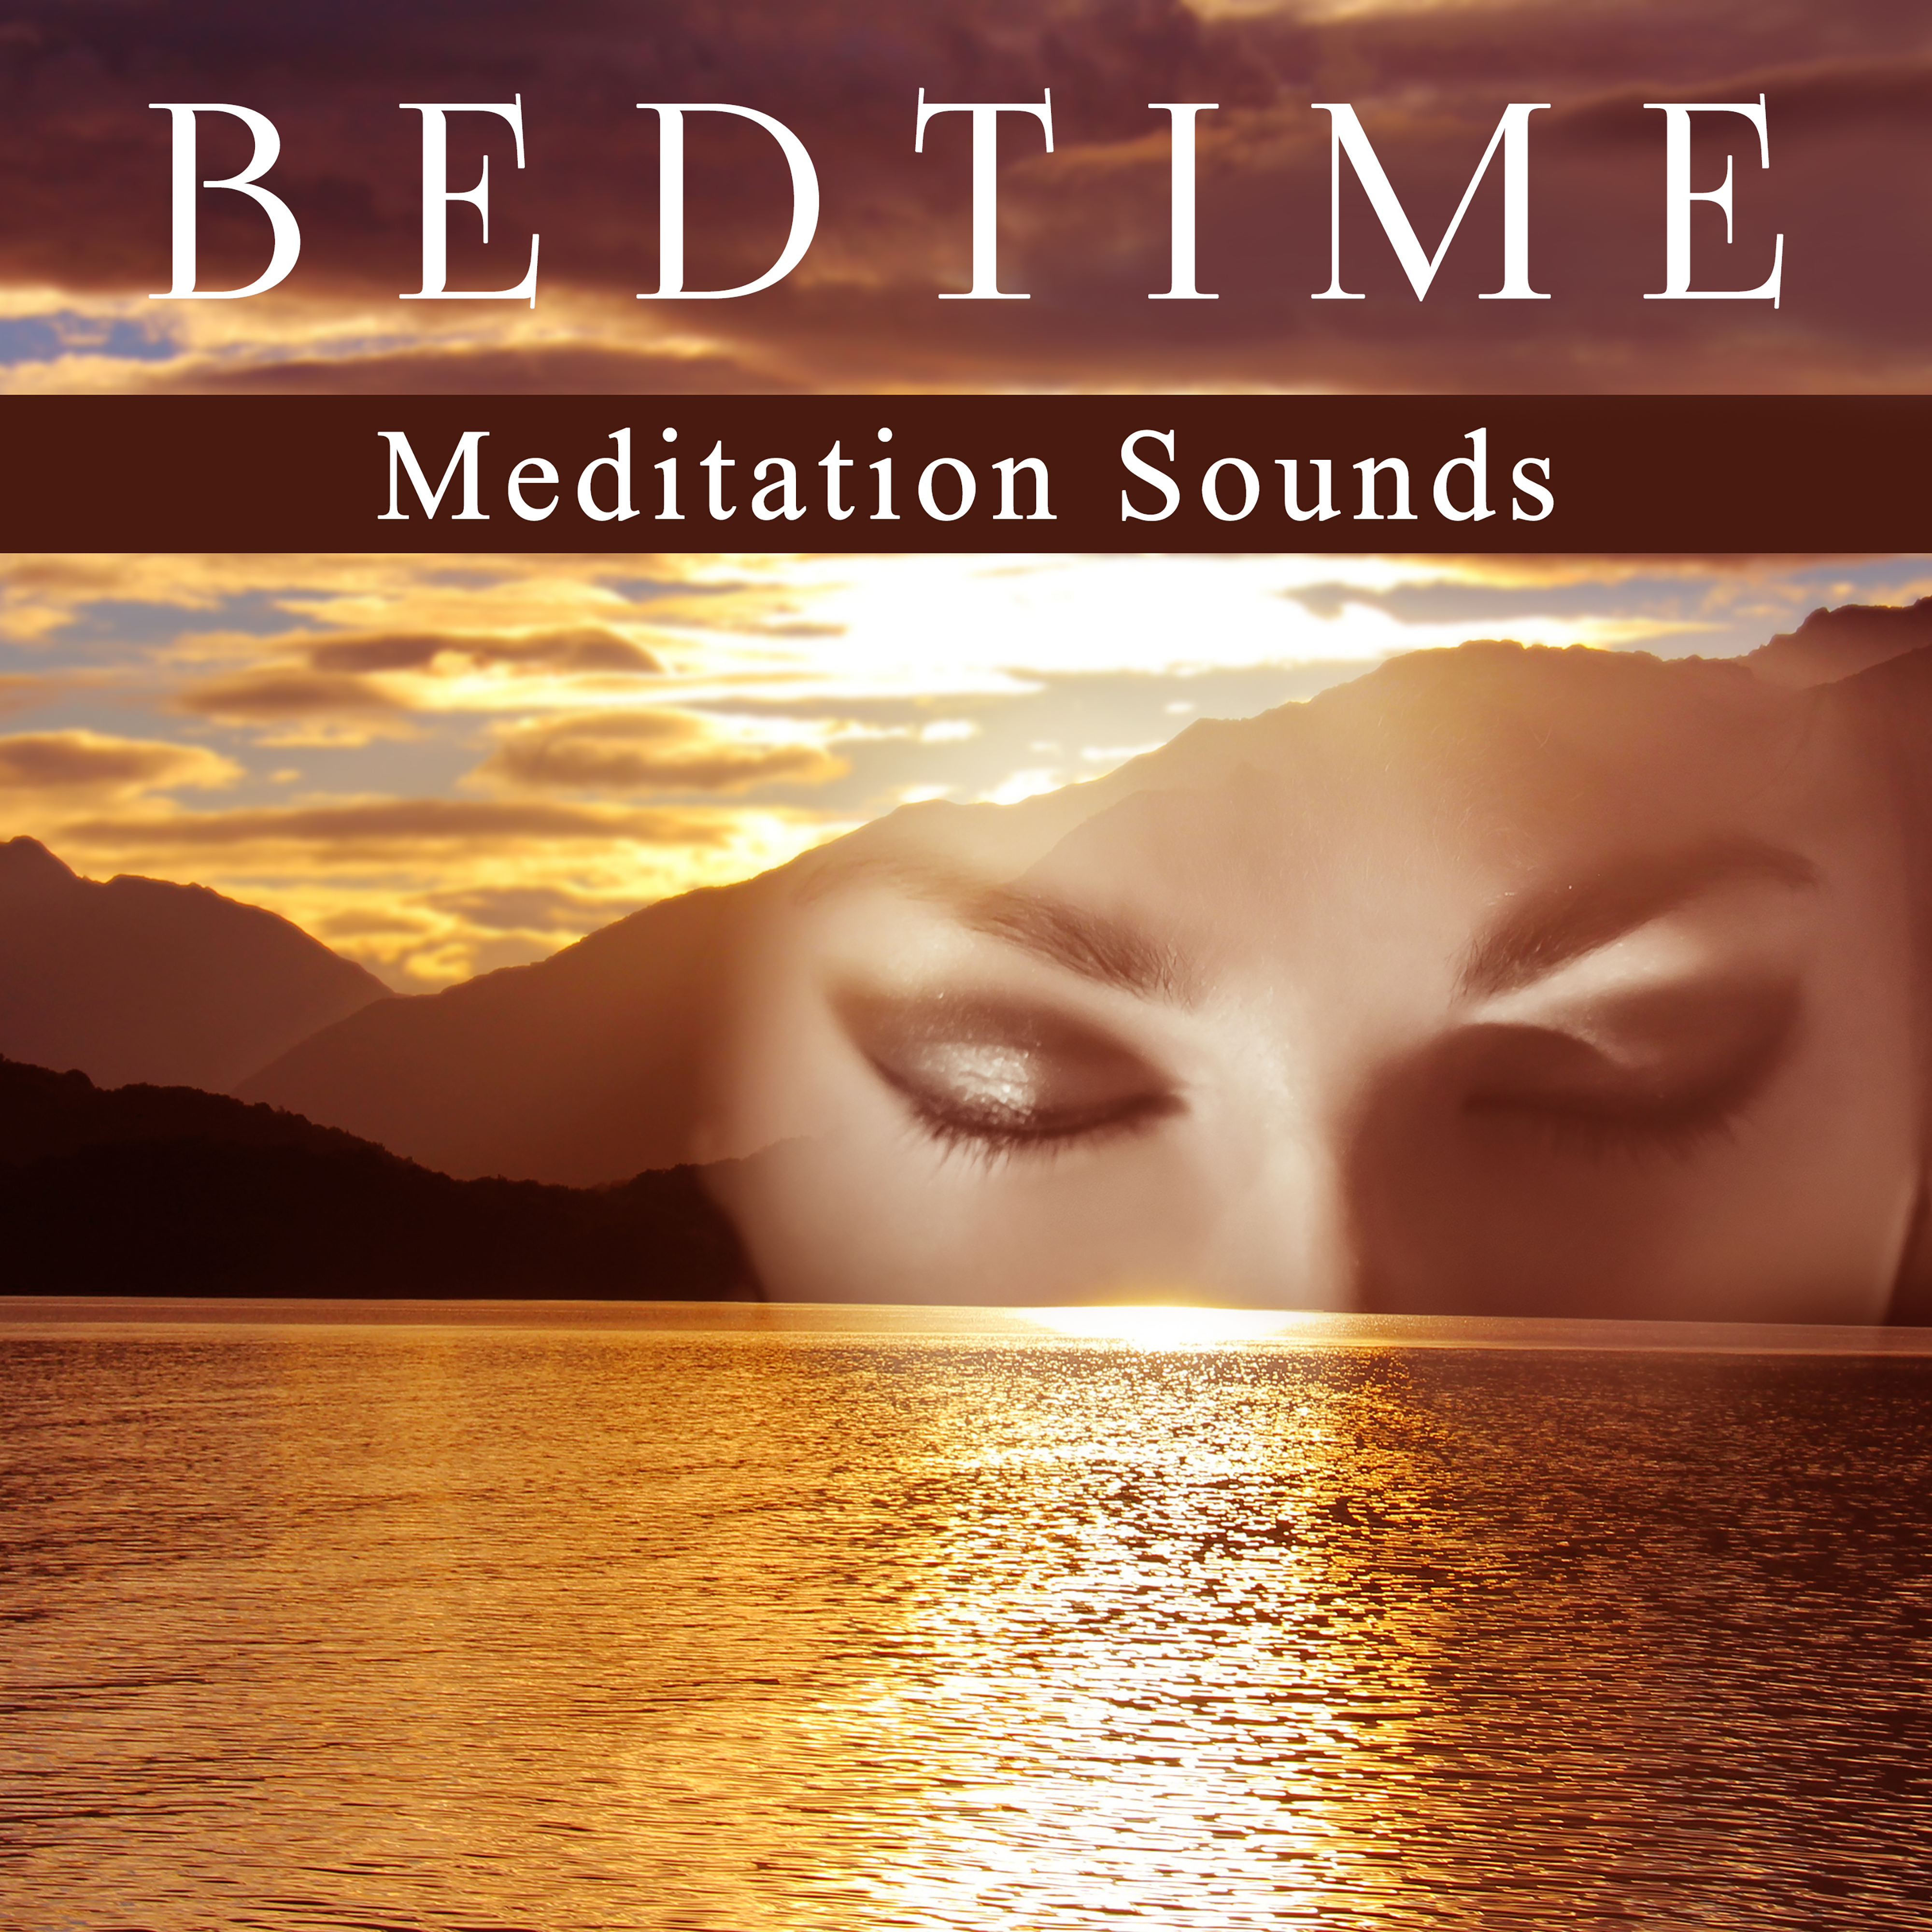 Bedtime Meditation Sounds  Yoga Practice, Calm Down Emotions, Rest  Sleep Well